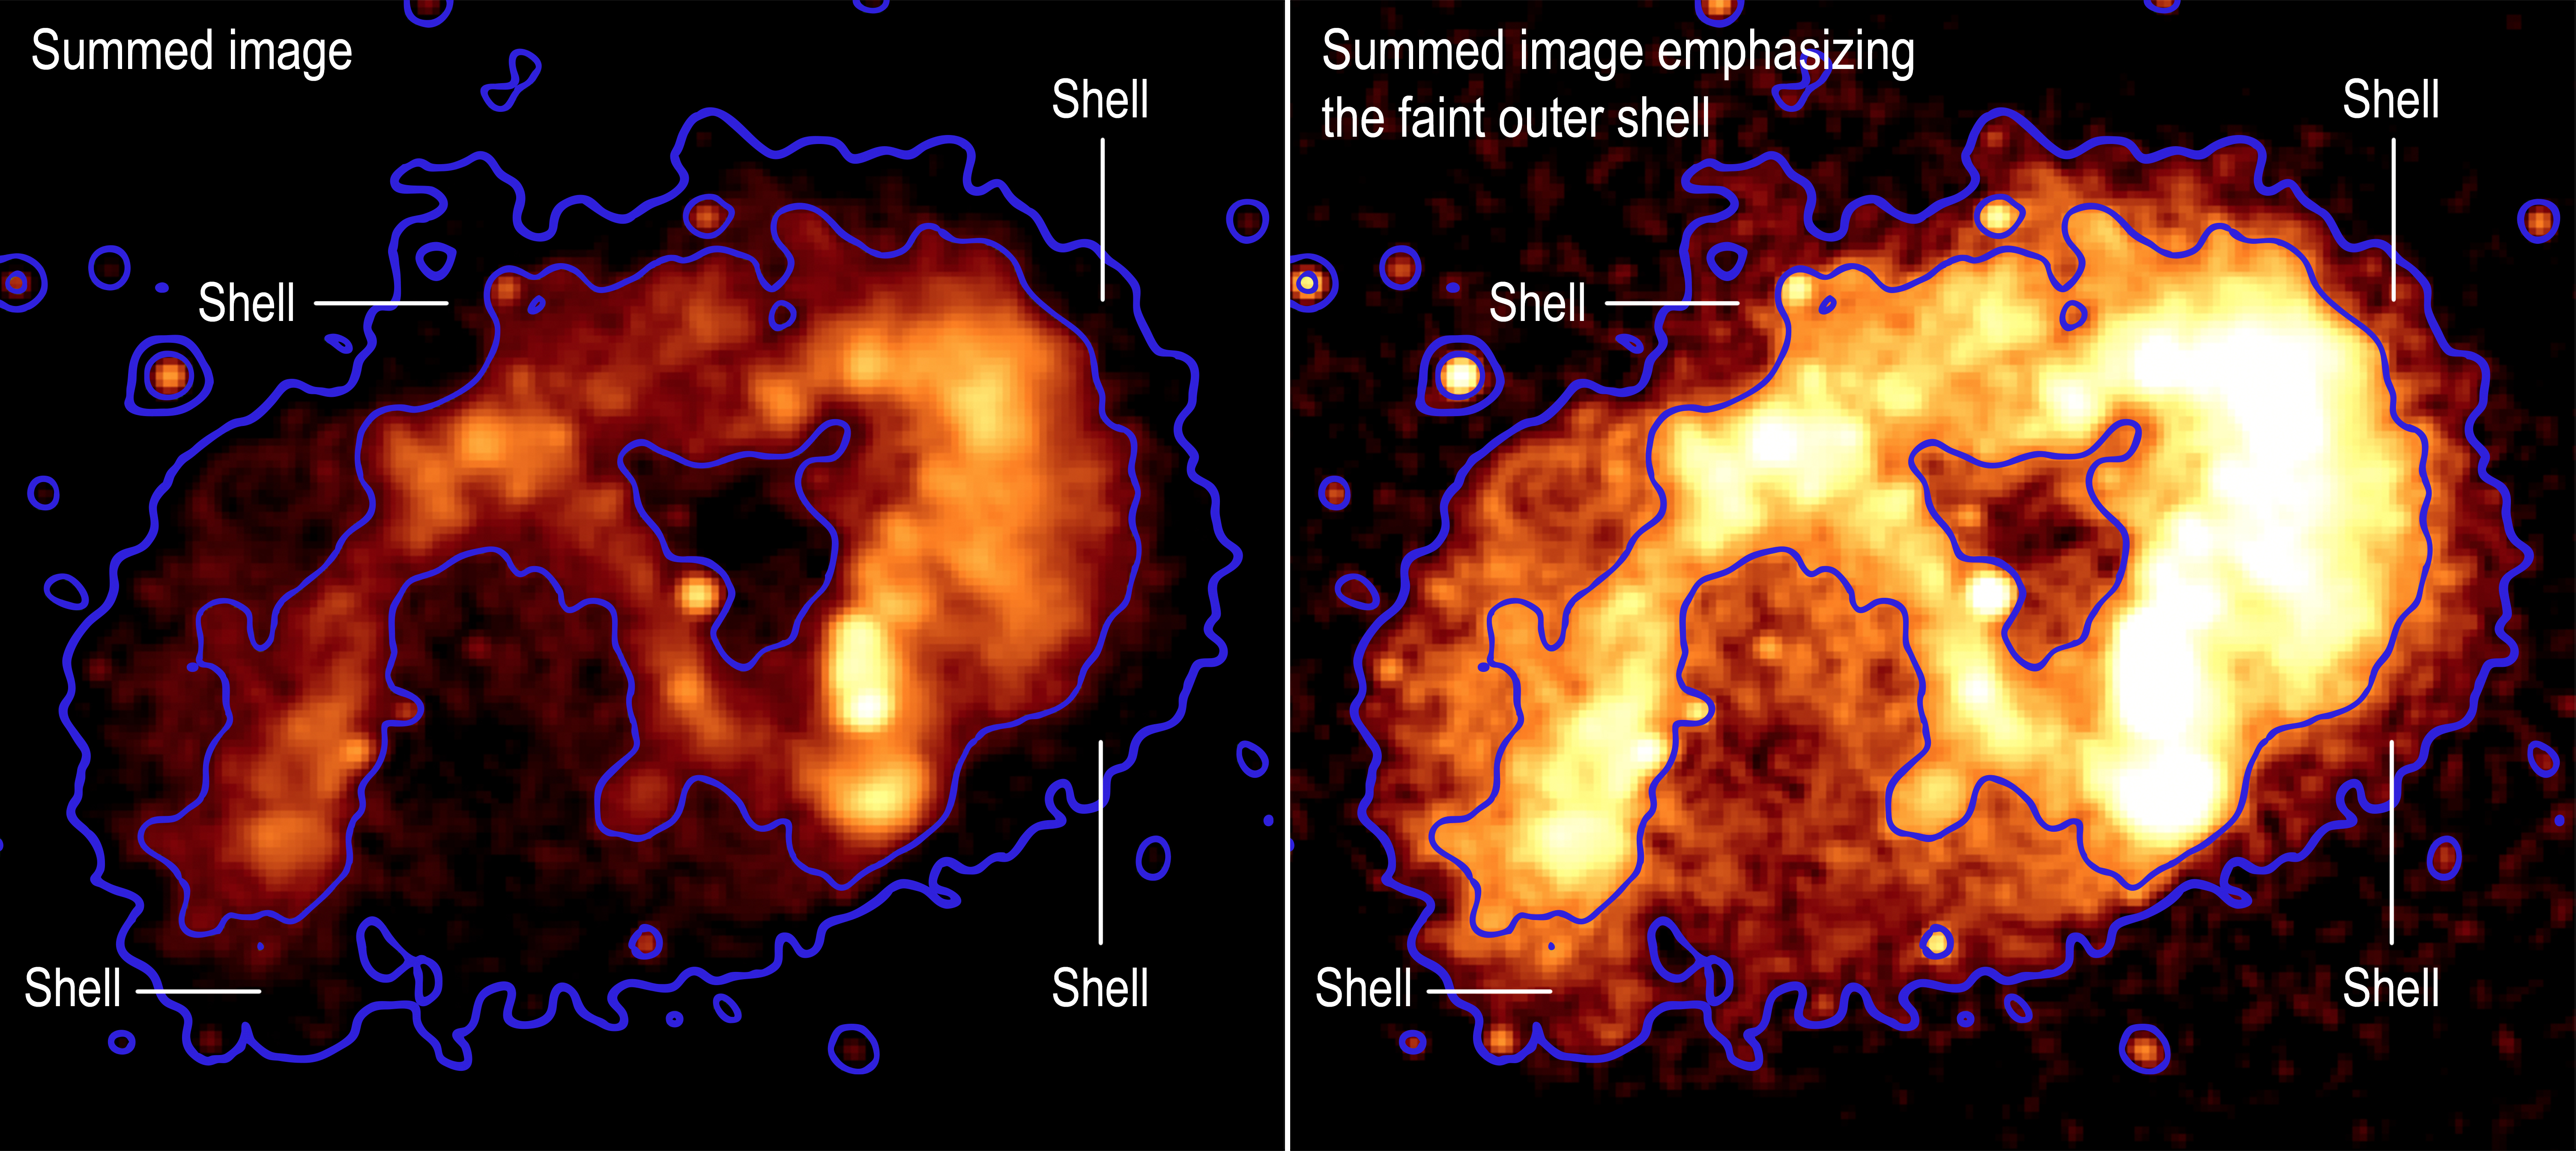 side by side images of stellar explosions